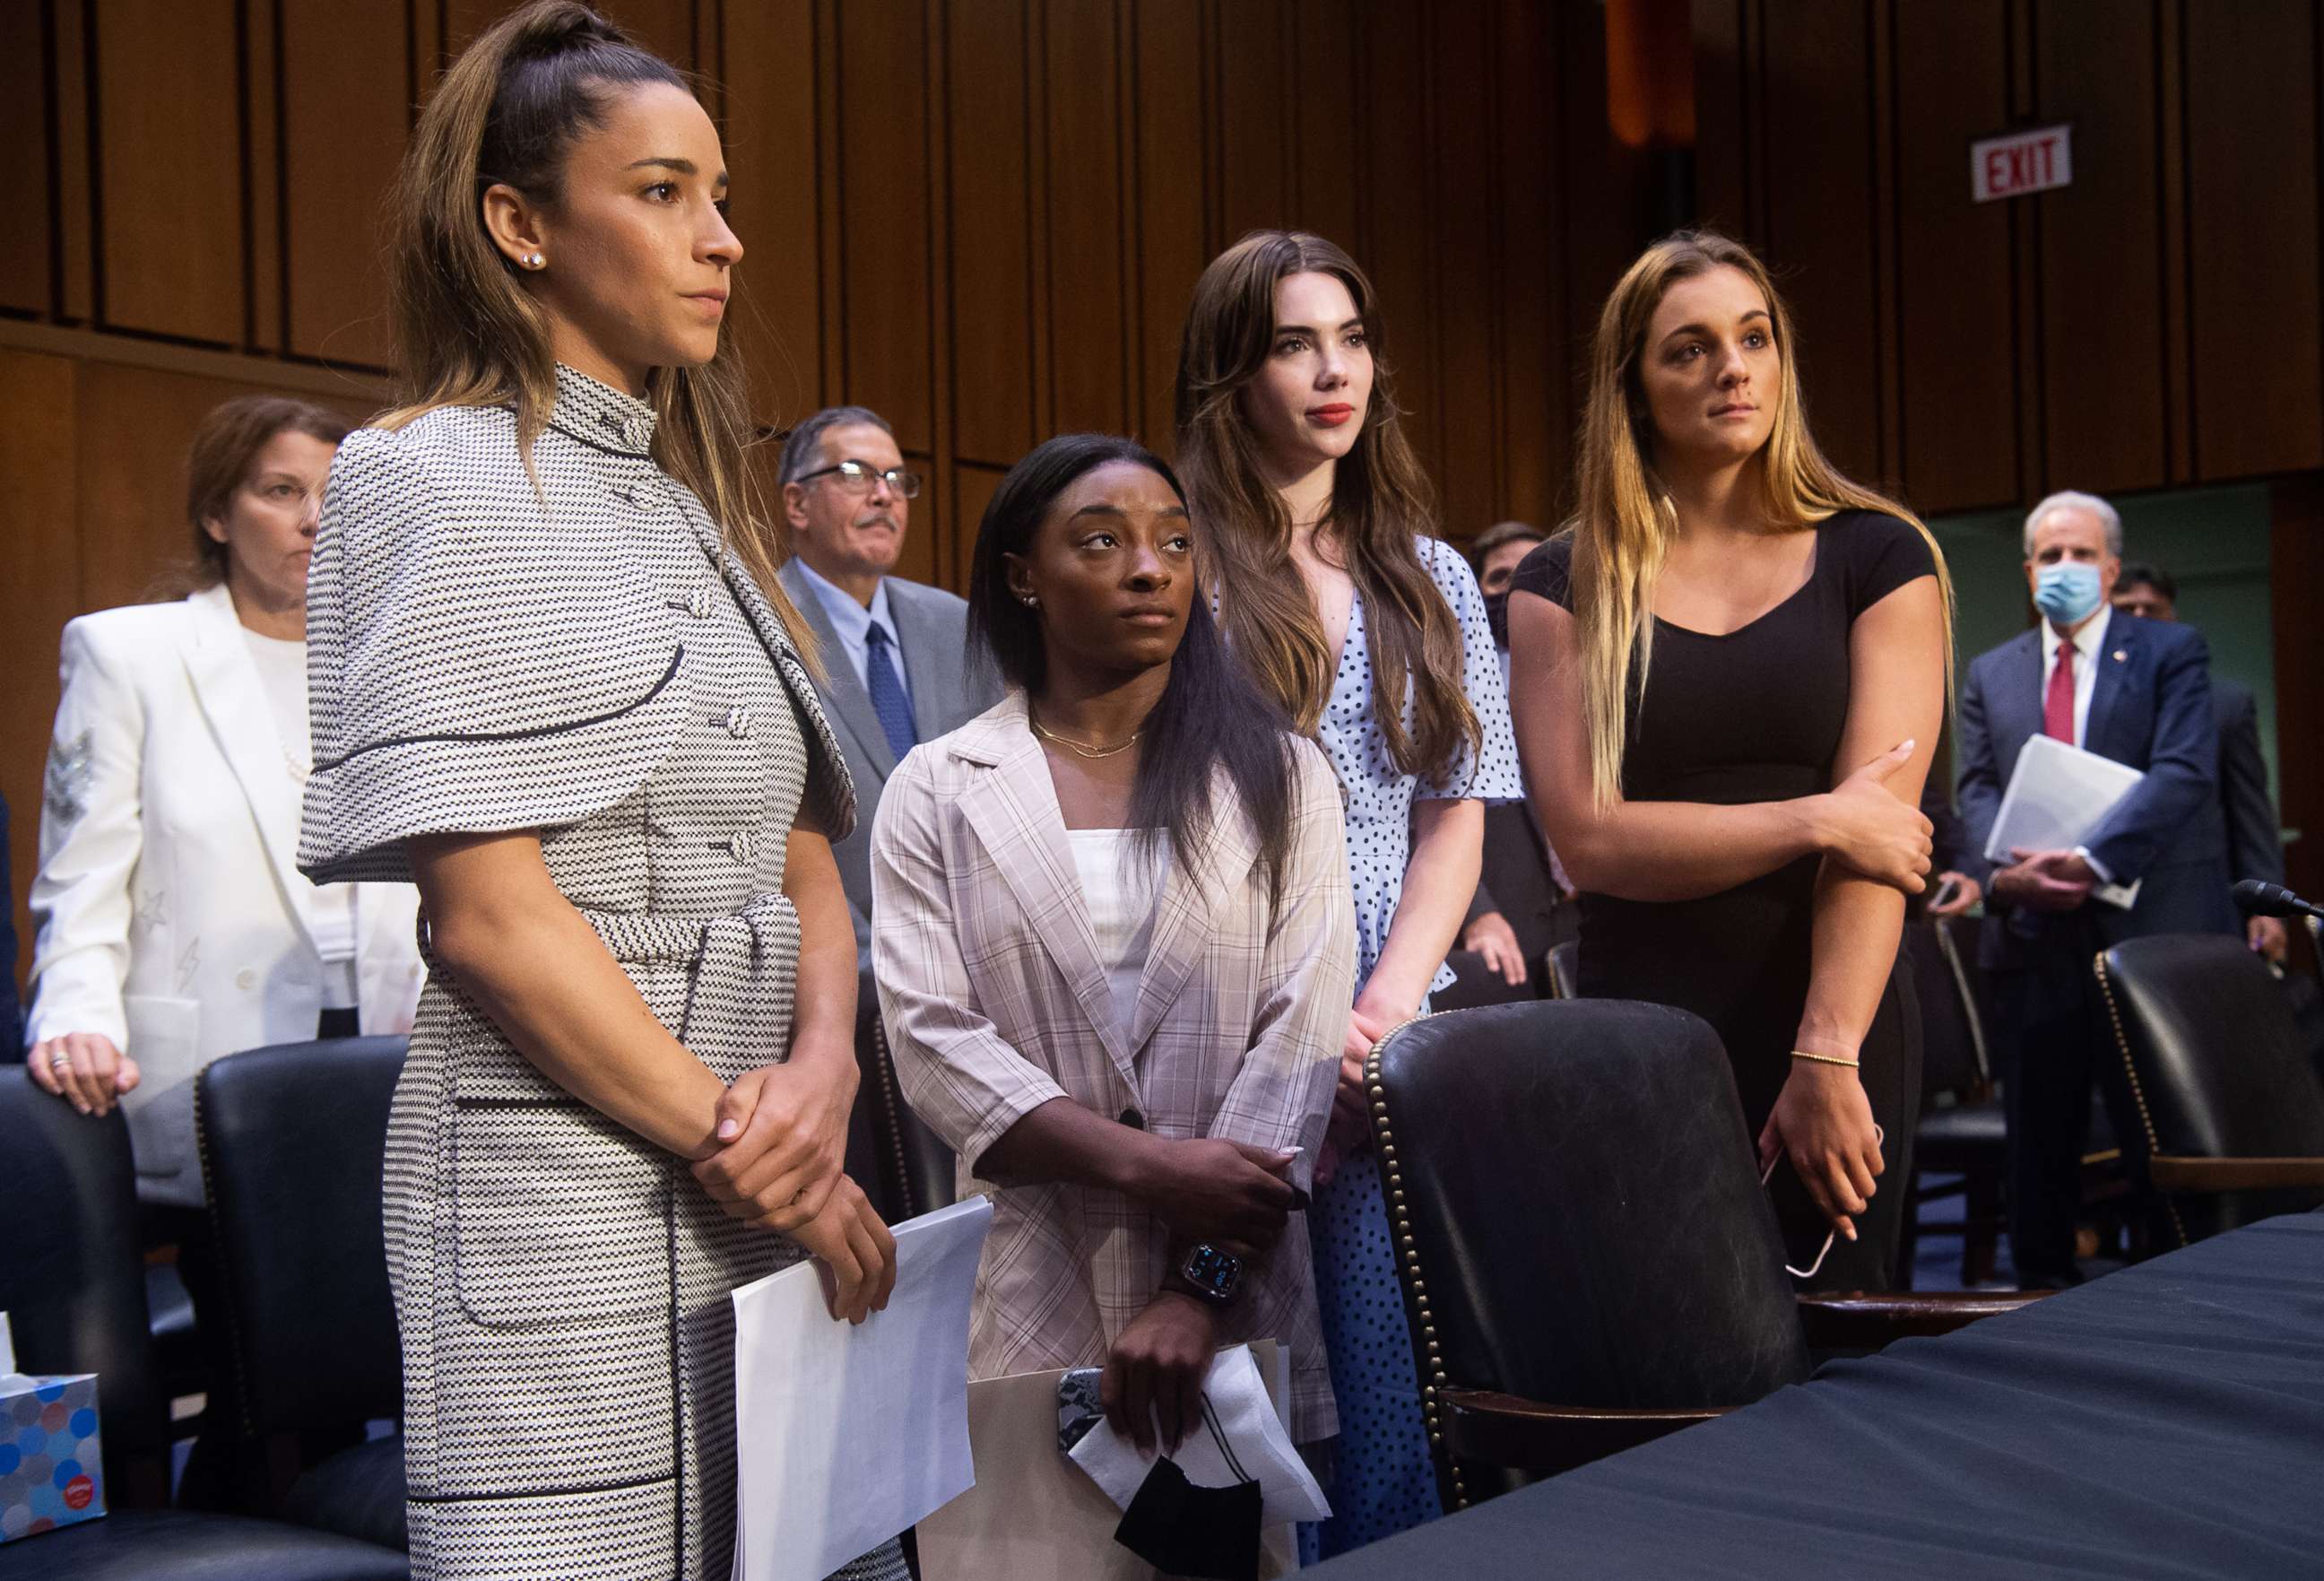 PHOTO: Olympic gymnasts leave after testifying during a Senate Judiciary hearing about the Inspector General's report on the FBI handling of the Larry Nassar investigation of sexual abuse of U.S. gymnasts, on Capitol Hill, Sept. 15, 2021.